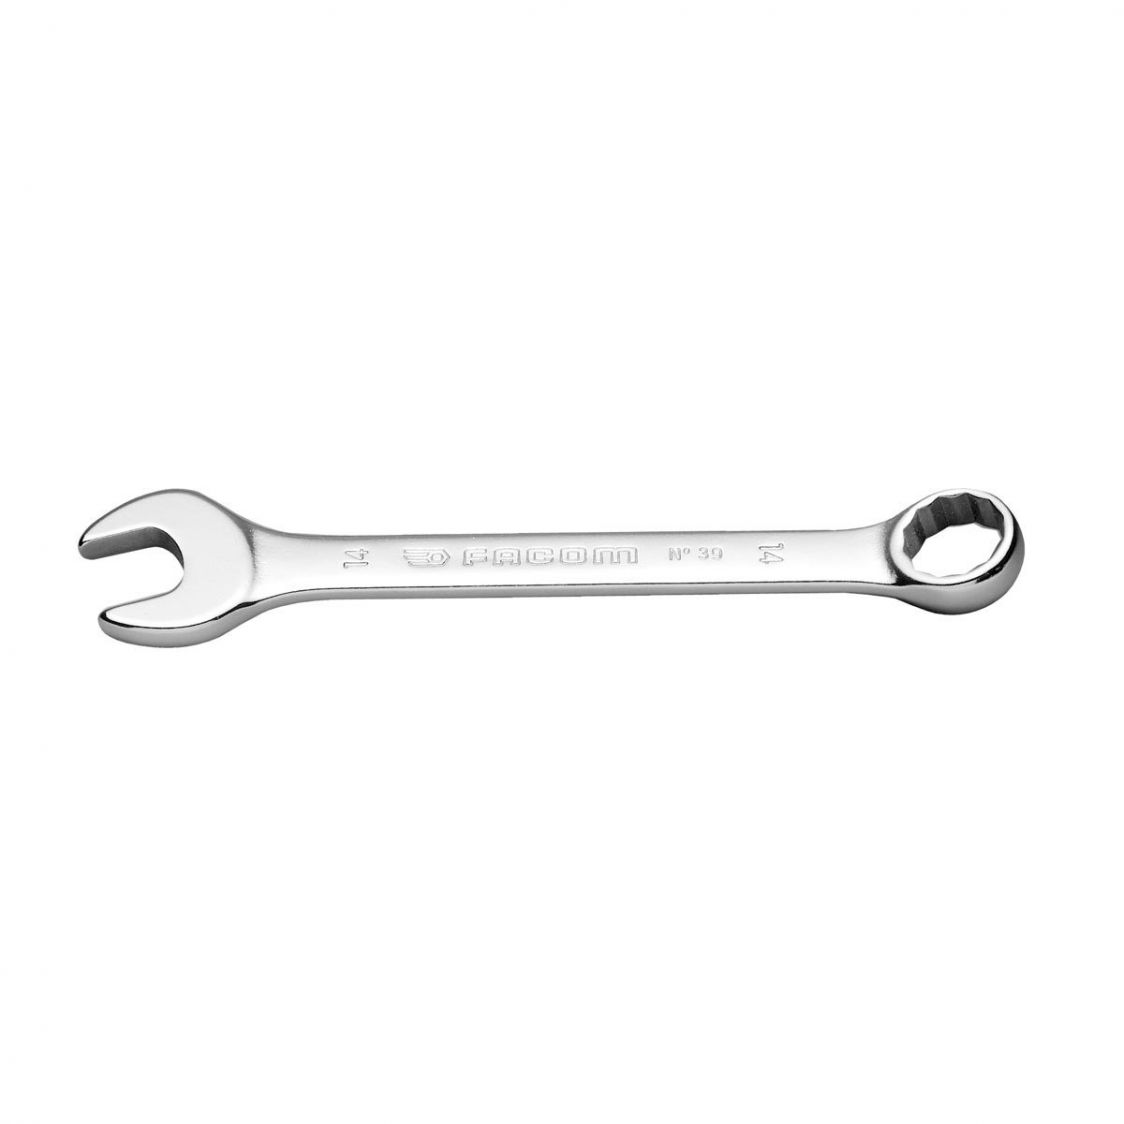 FACOM 39.12 - 12mm Metric Stubby Combination Spanner